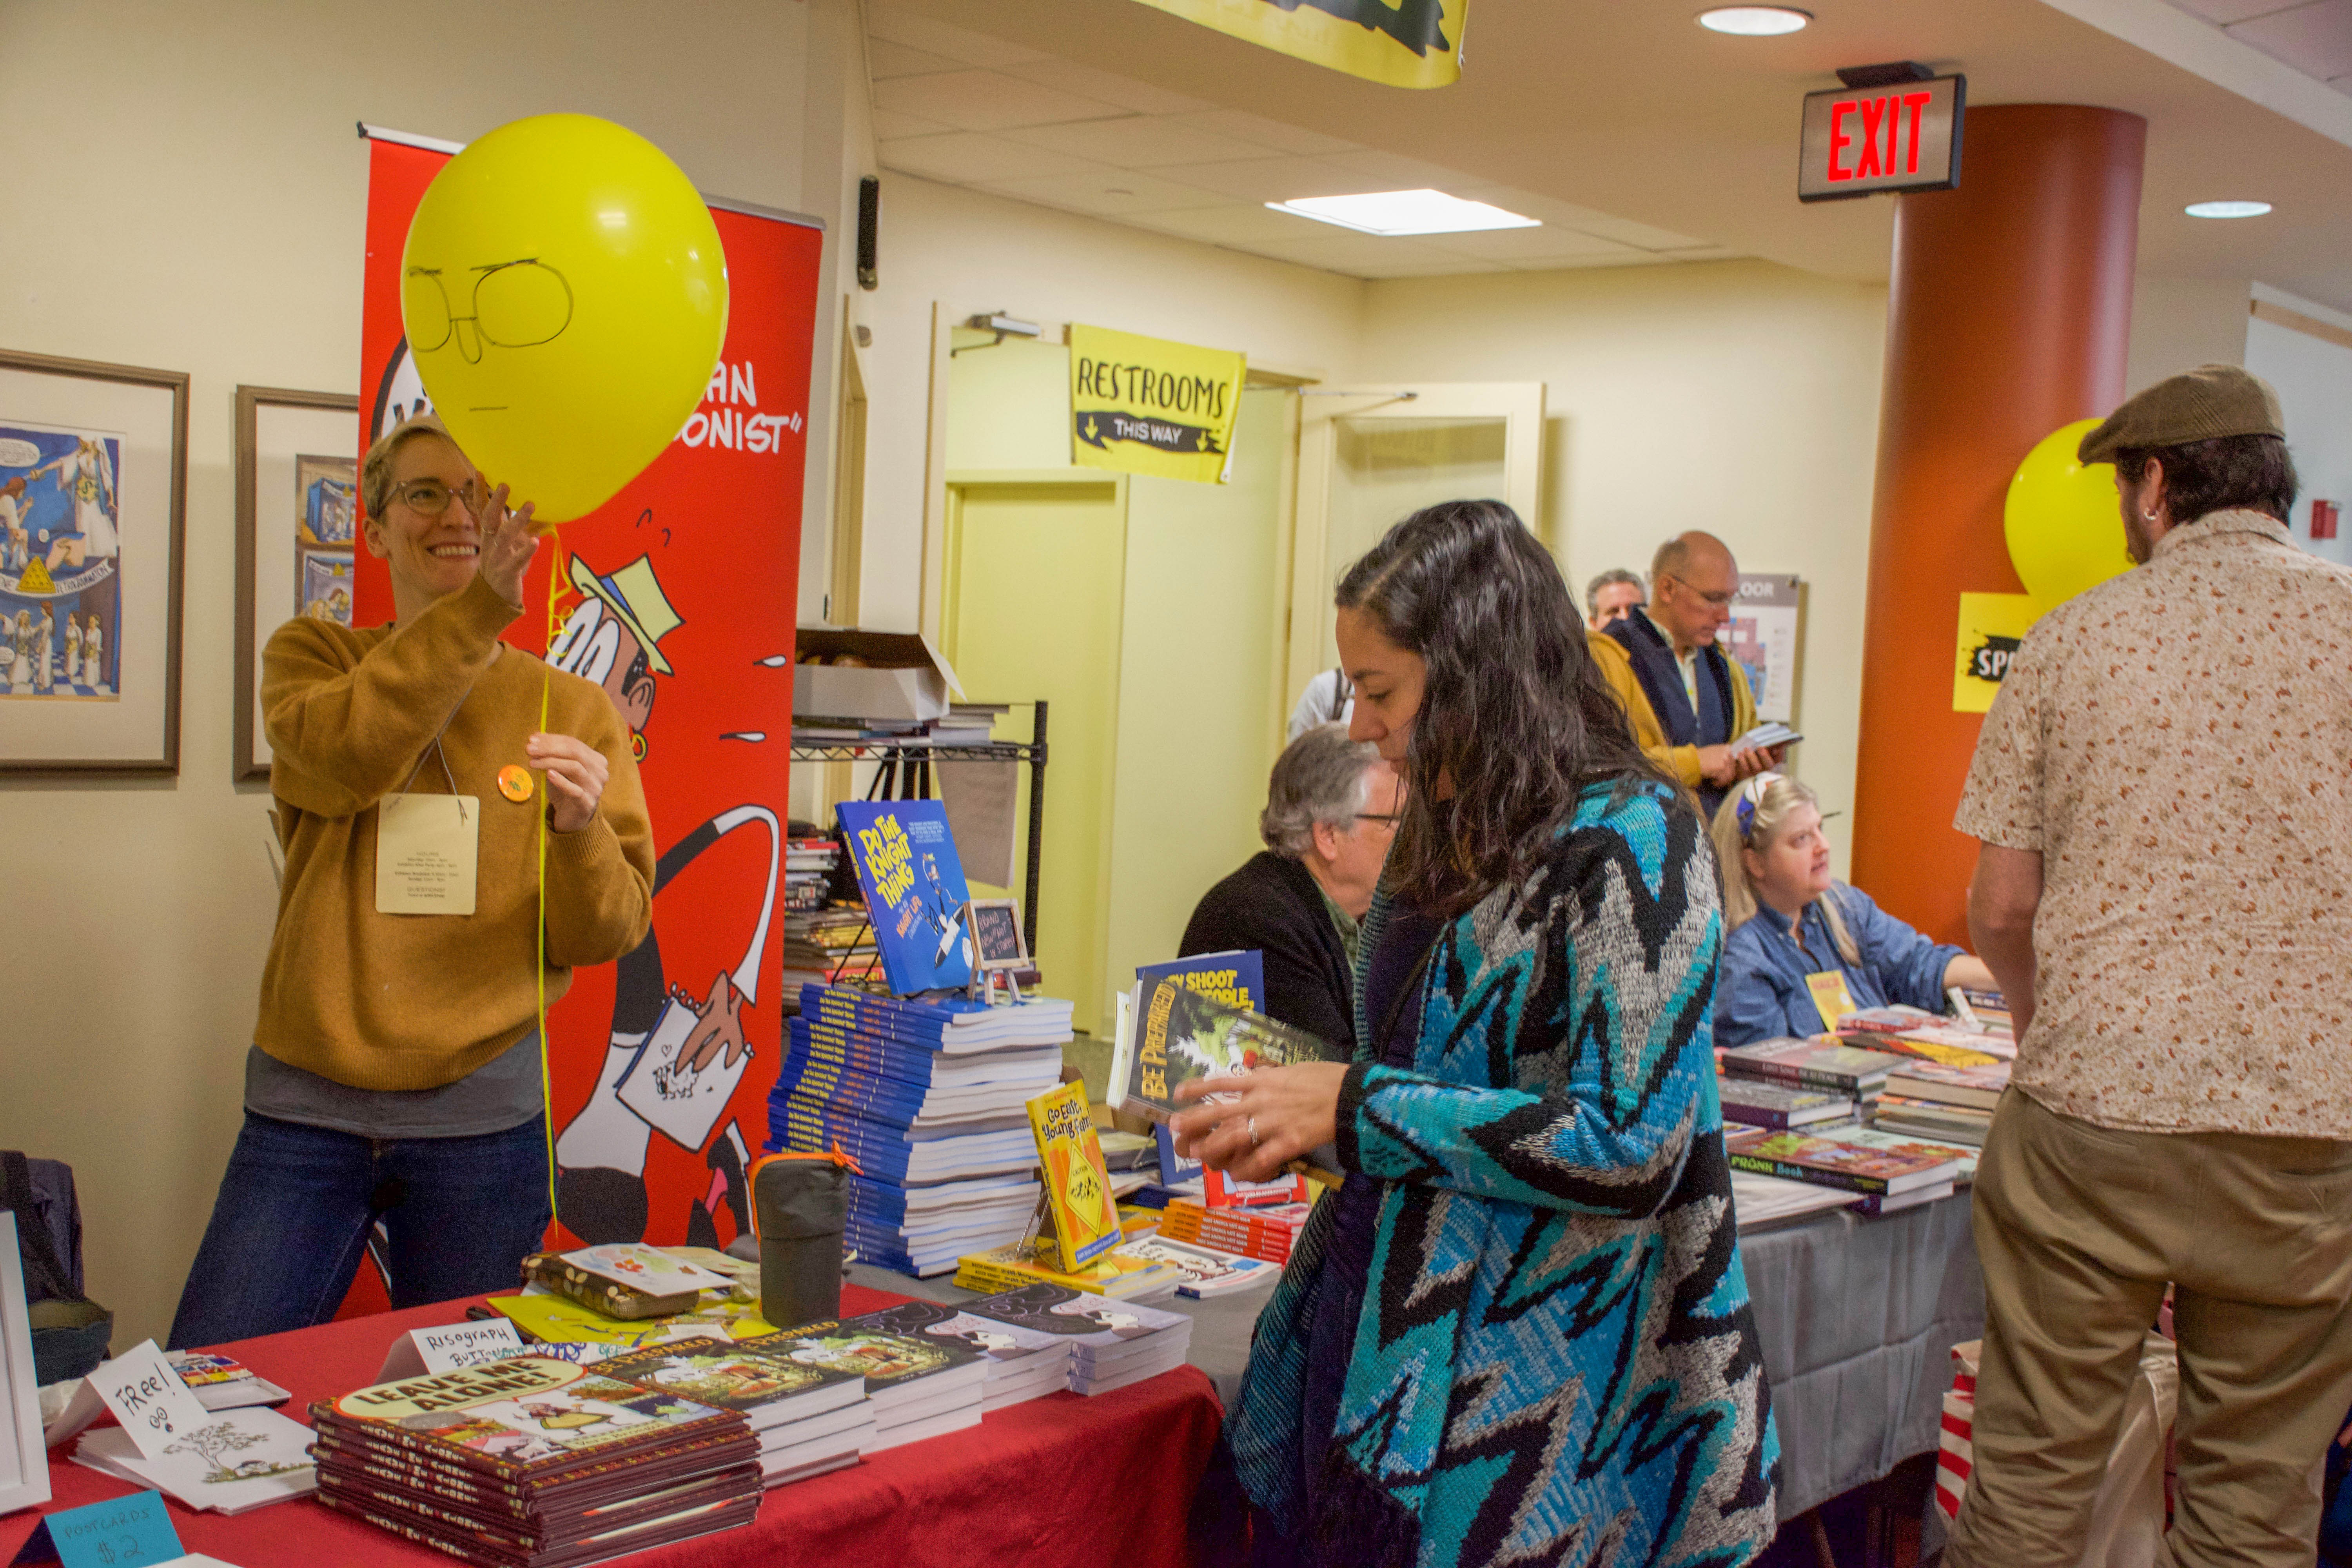 A woman plays with a yellow balloon at a table of comic books